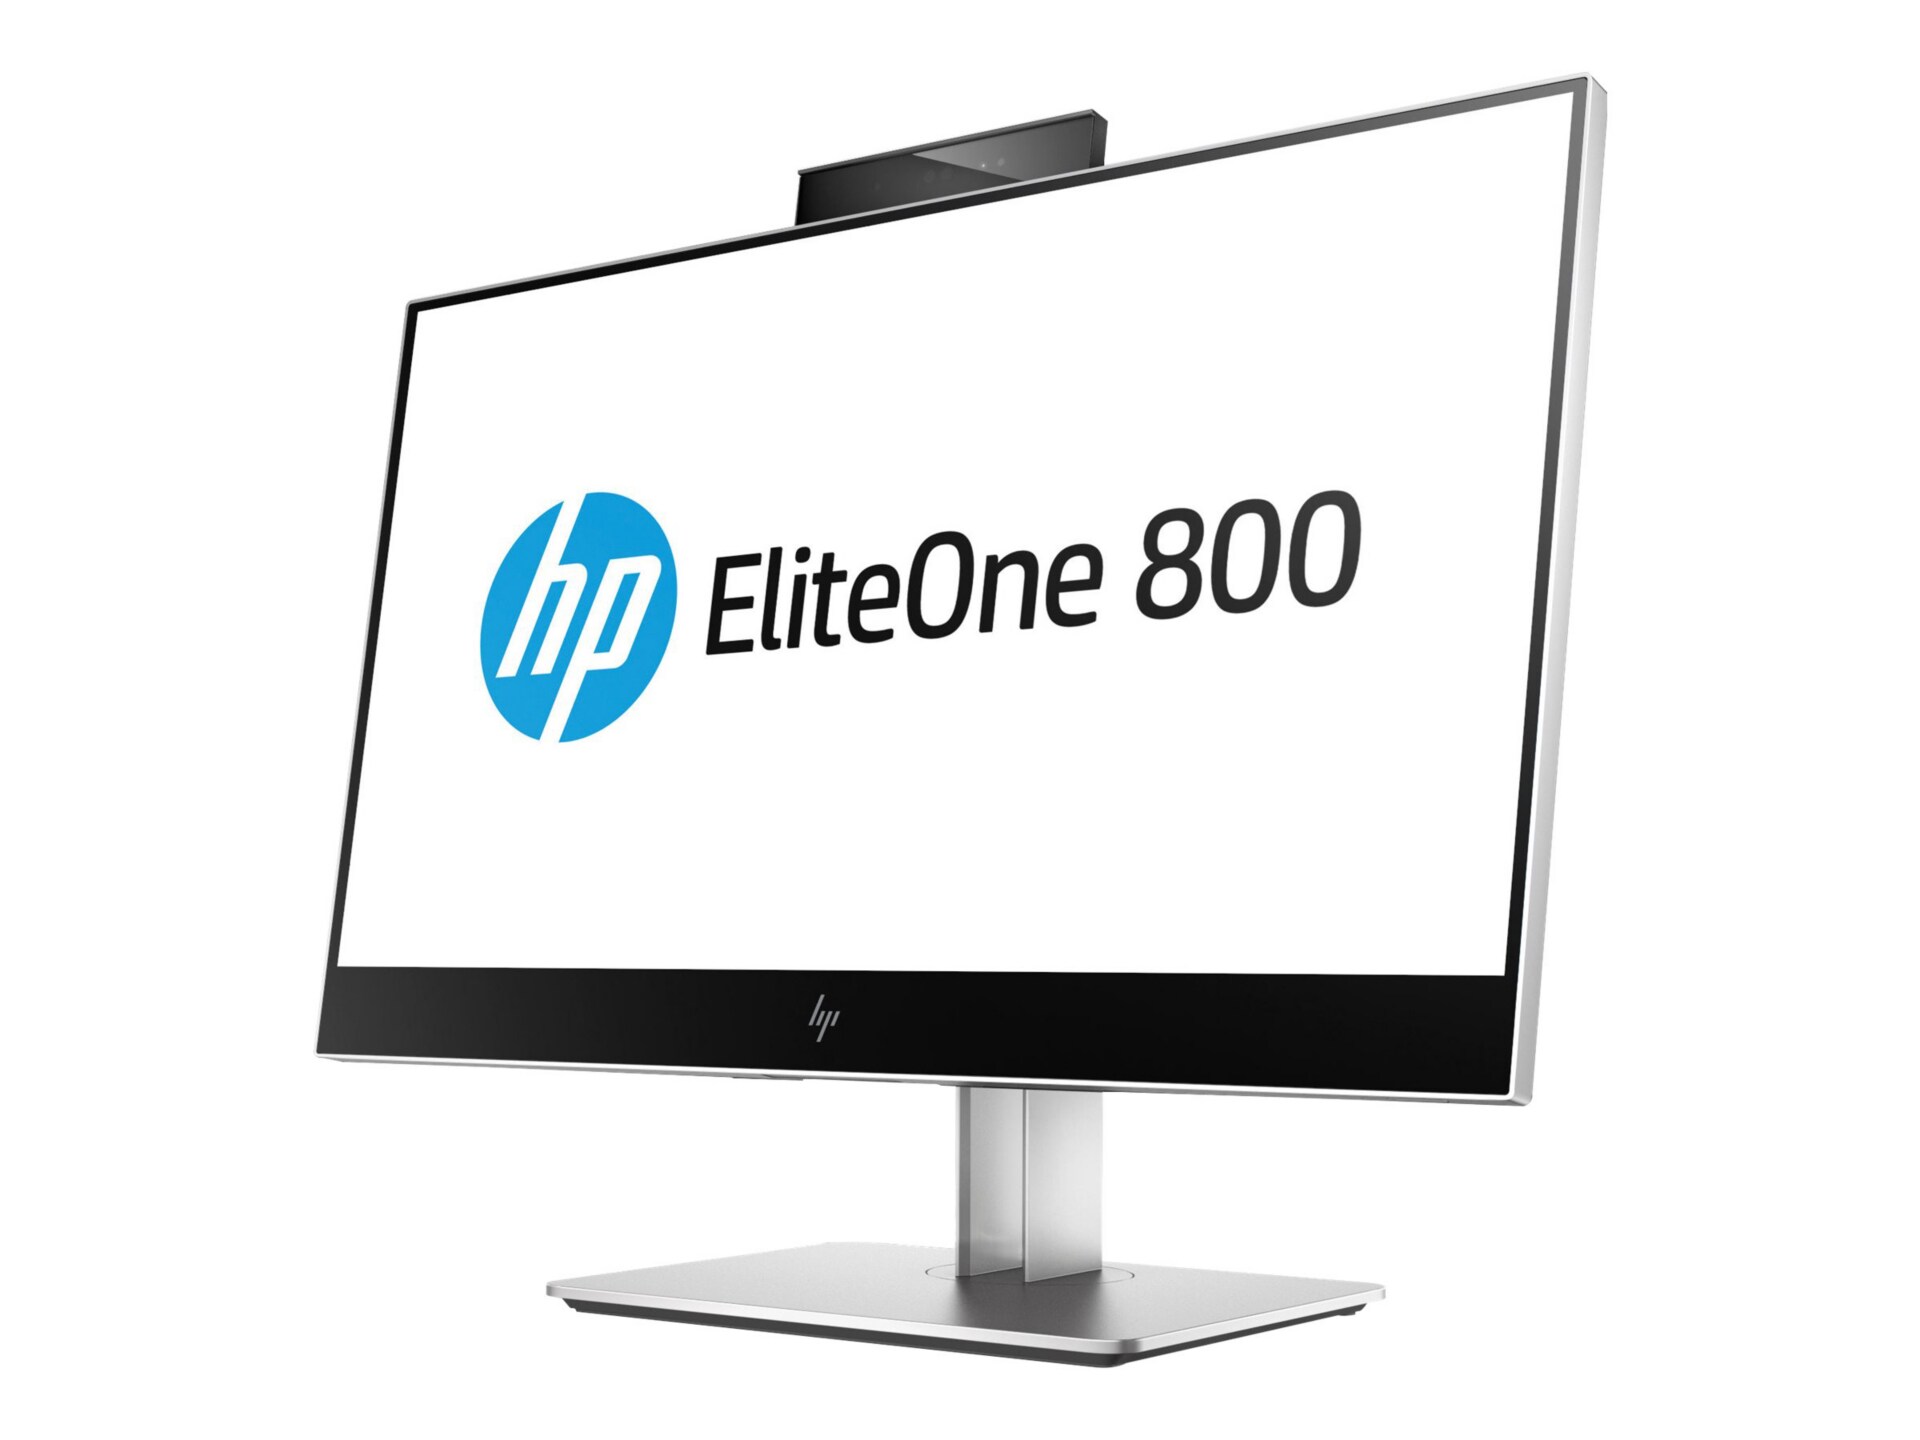 HP EliteOne 800 G3 - Healthcare - all-in-one - Core i5 7500 3.4 GHz - 8 GB - 1 TB - LED 23.8" - French Canadian